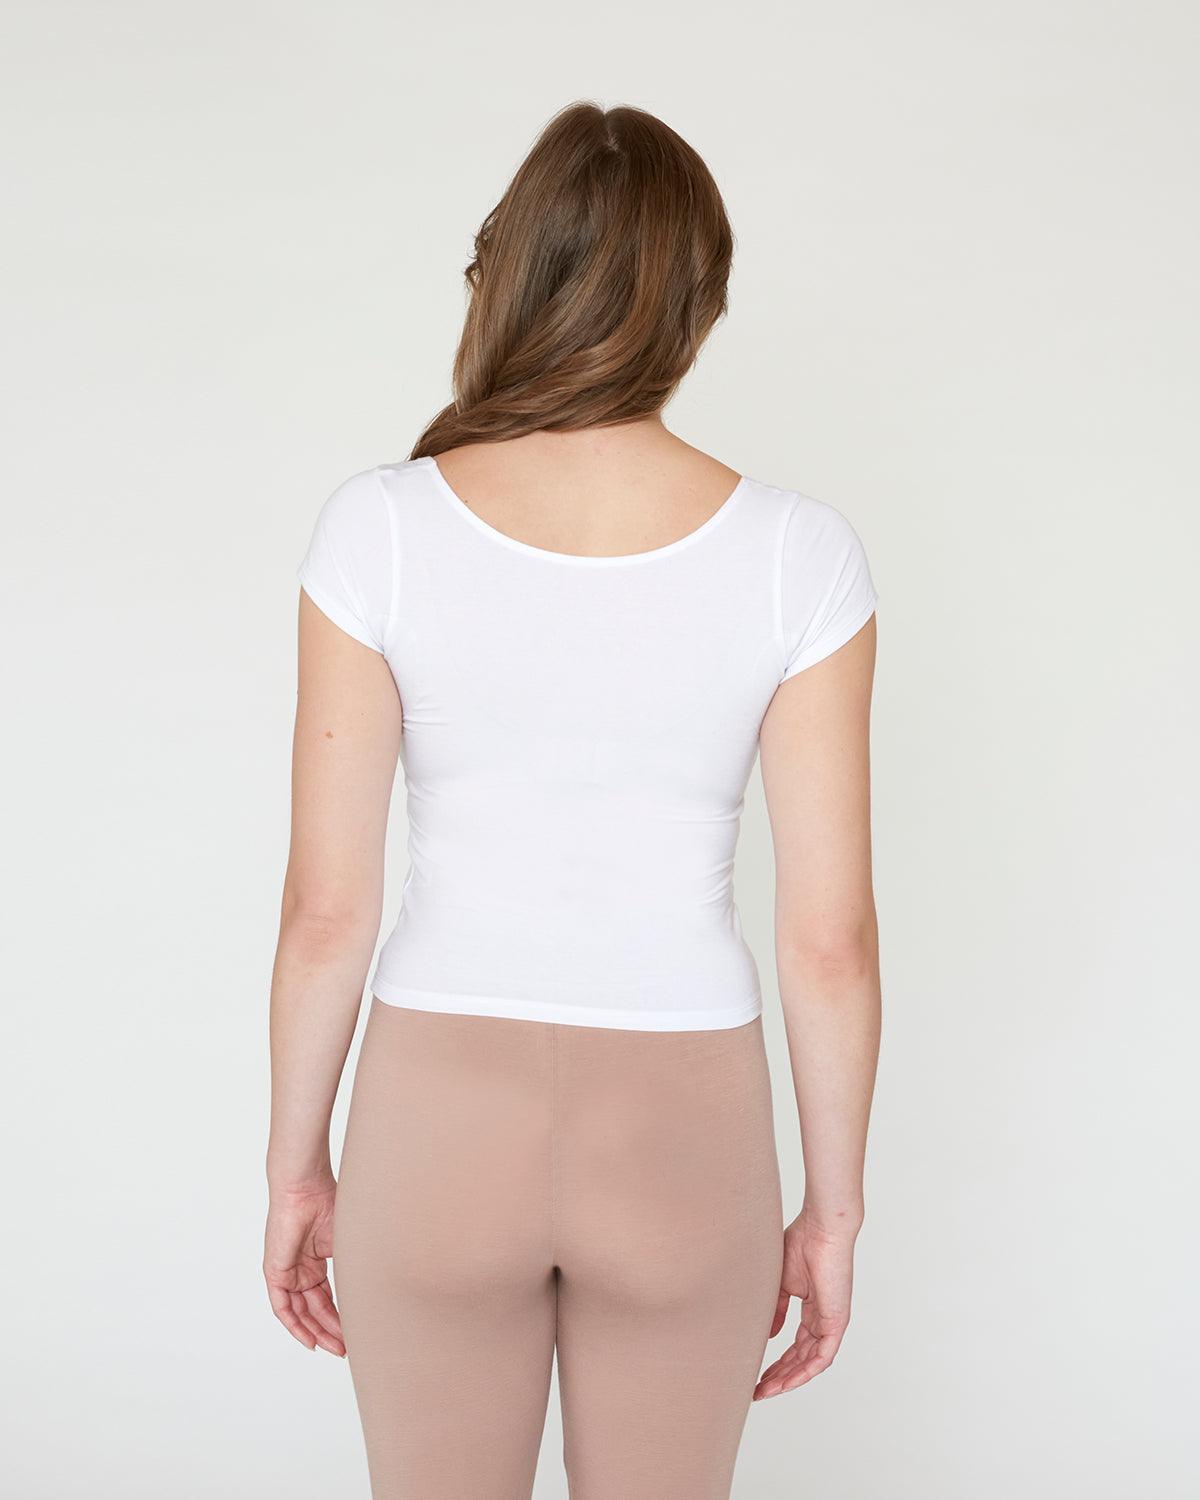 "#color_white| Siobhan is 5'8.5" and wears a size S